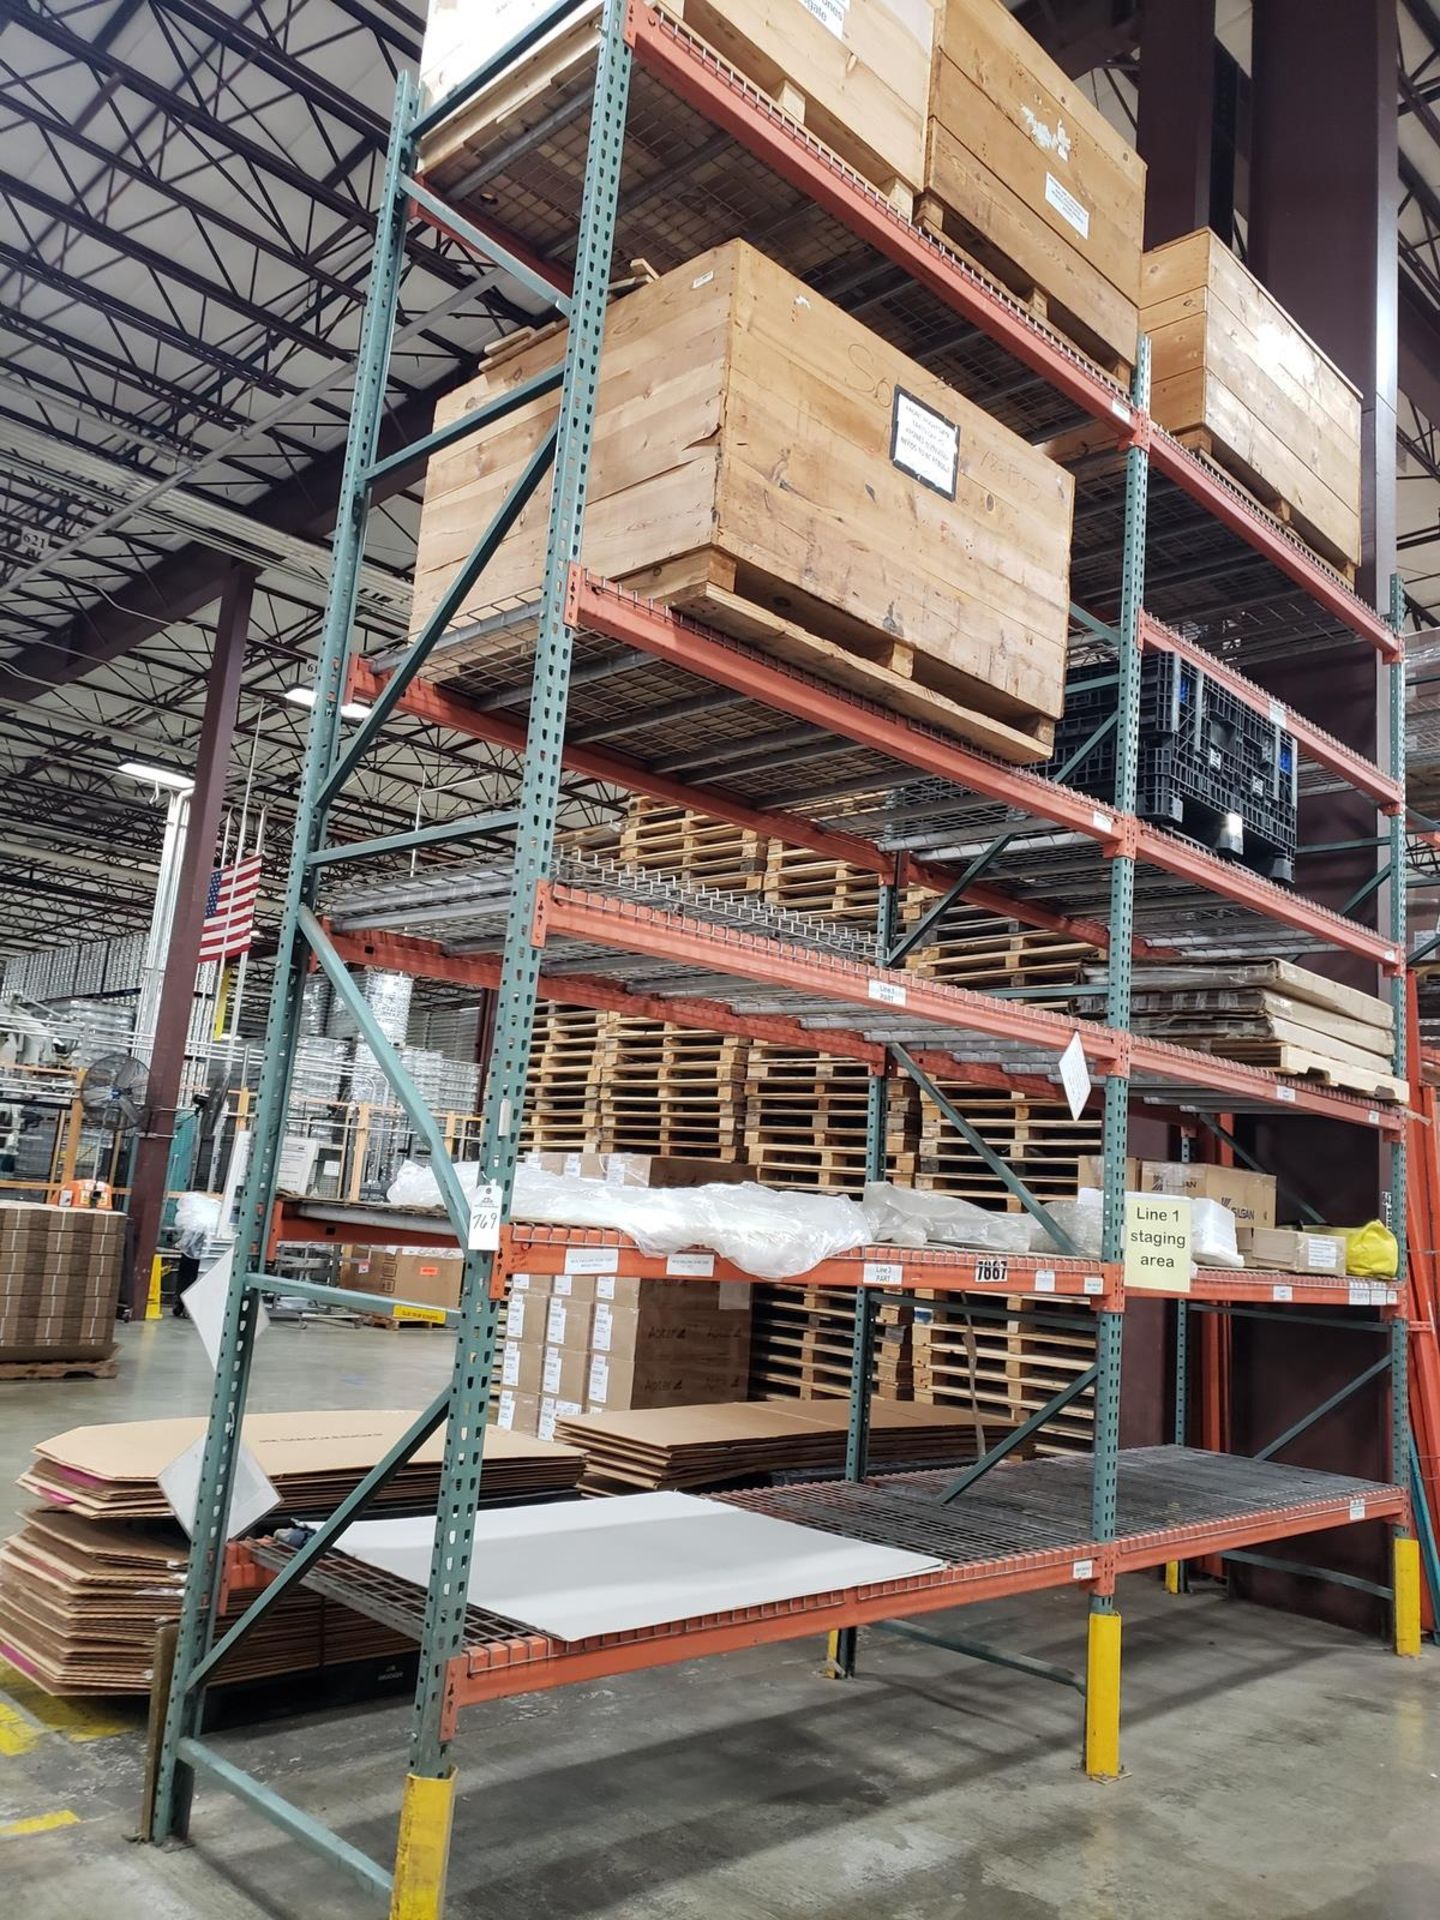 Lot of Pallet Rack, (3) Uprights 42'' x 16', (22) Beams 8', (22) Wire Decks (Approx | Rig Fee $250